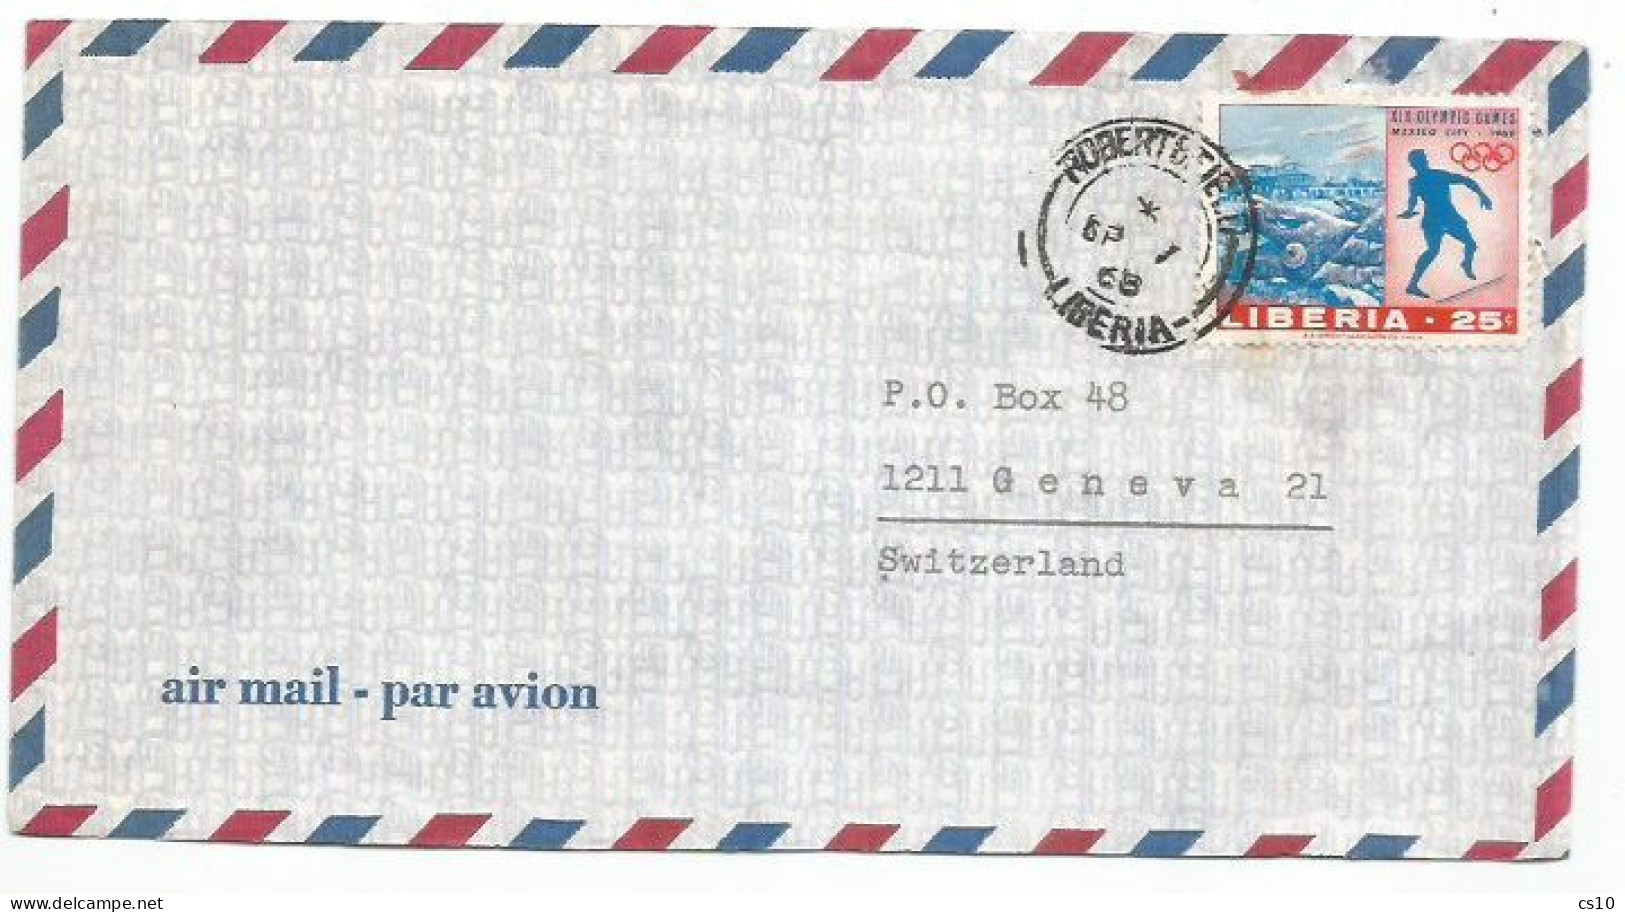 Liberia Airmail Cover Robertsfield 7sep1968 X Suisse With Olympic Games Mexico 1968 C.25 Discus Throw Solo Franking - Athletics